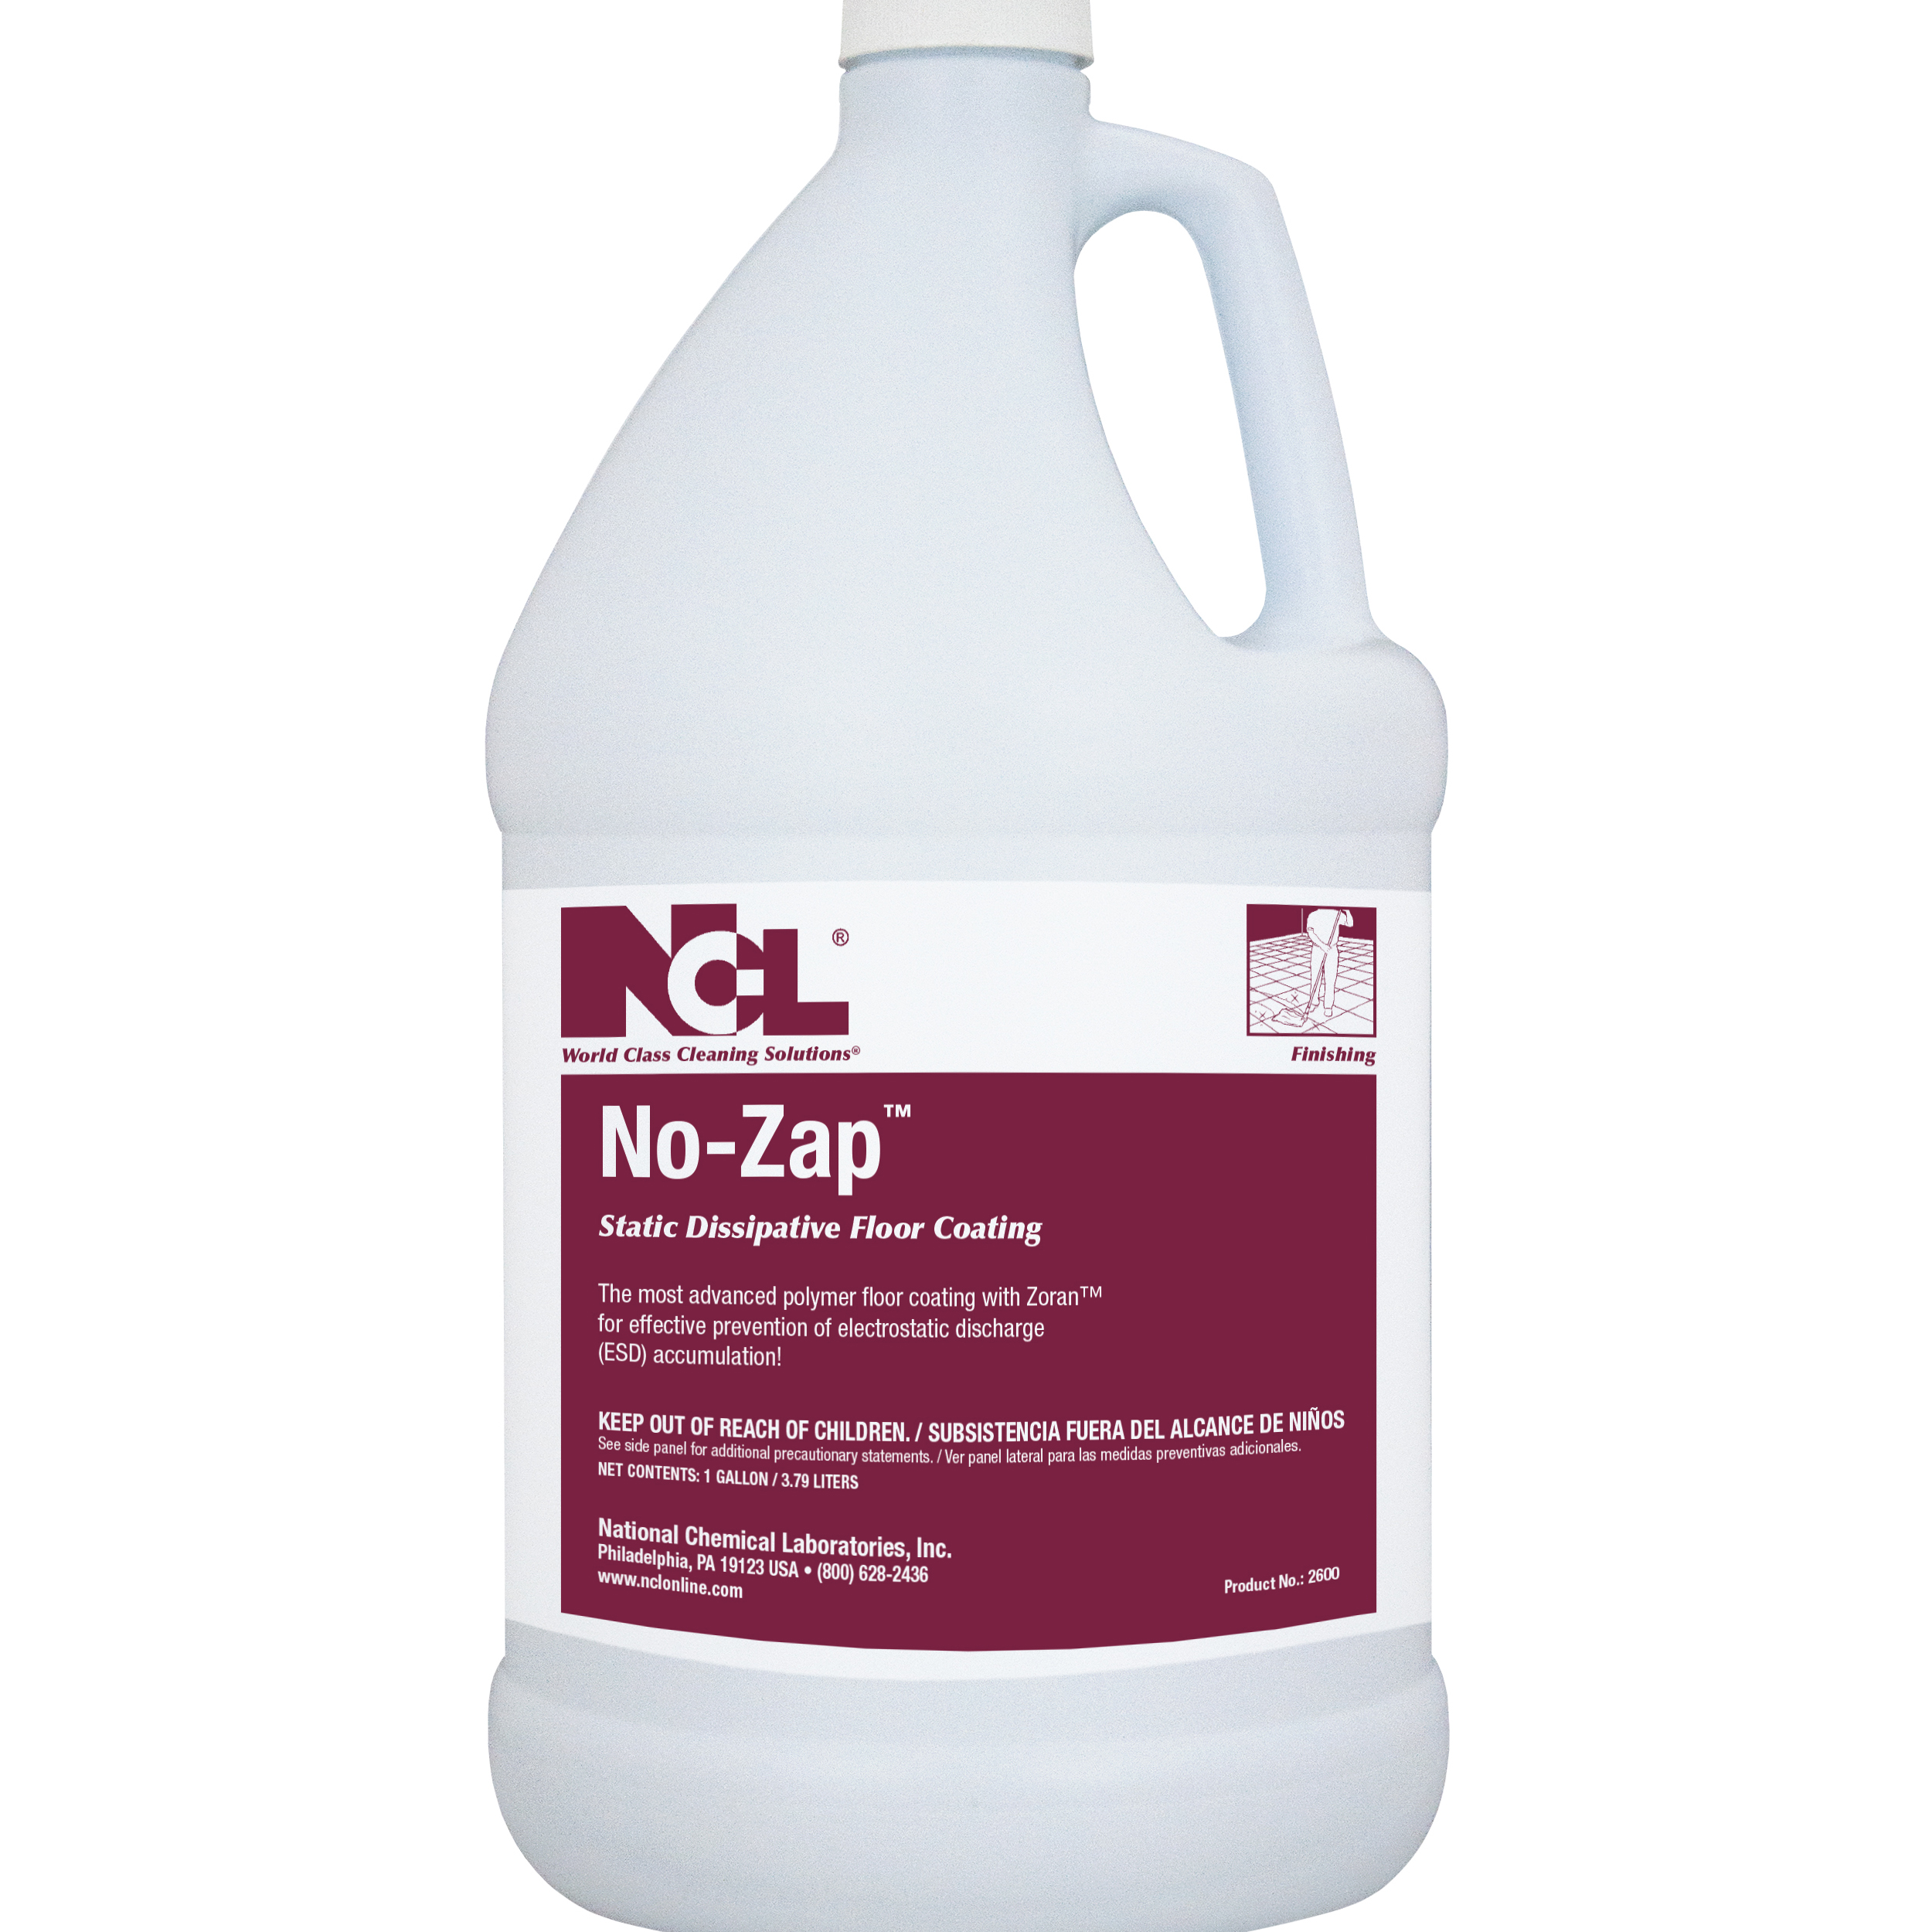 https://sourcesupplycompany.com/images/product/Large/2600-29_No_Zap_Coating_1_gal.jpg